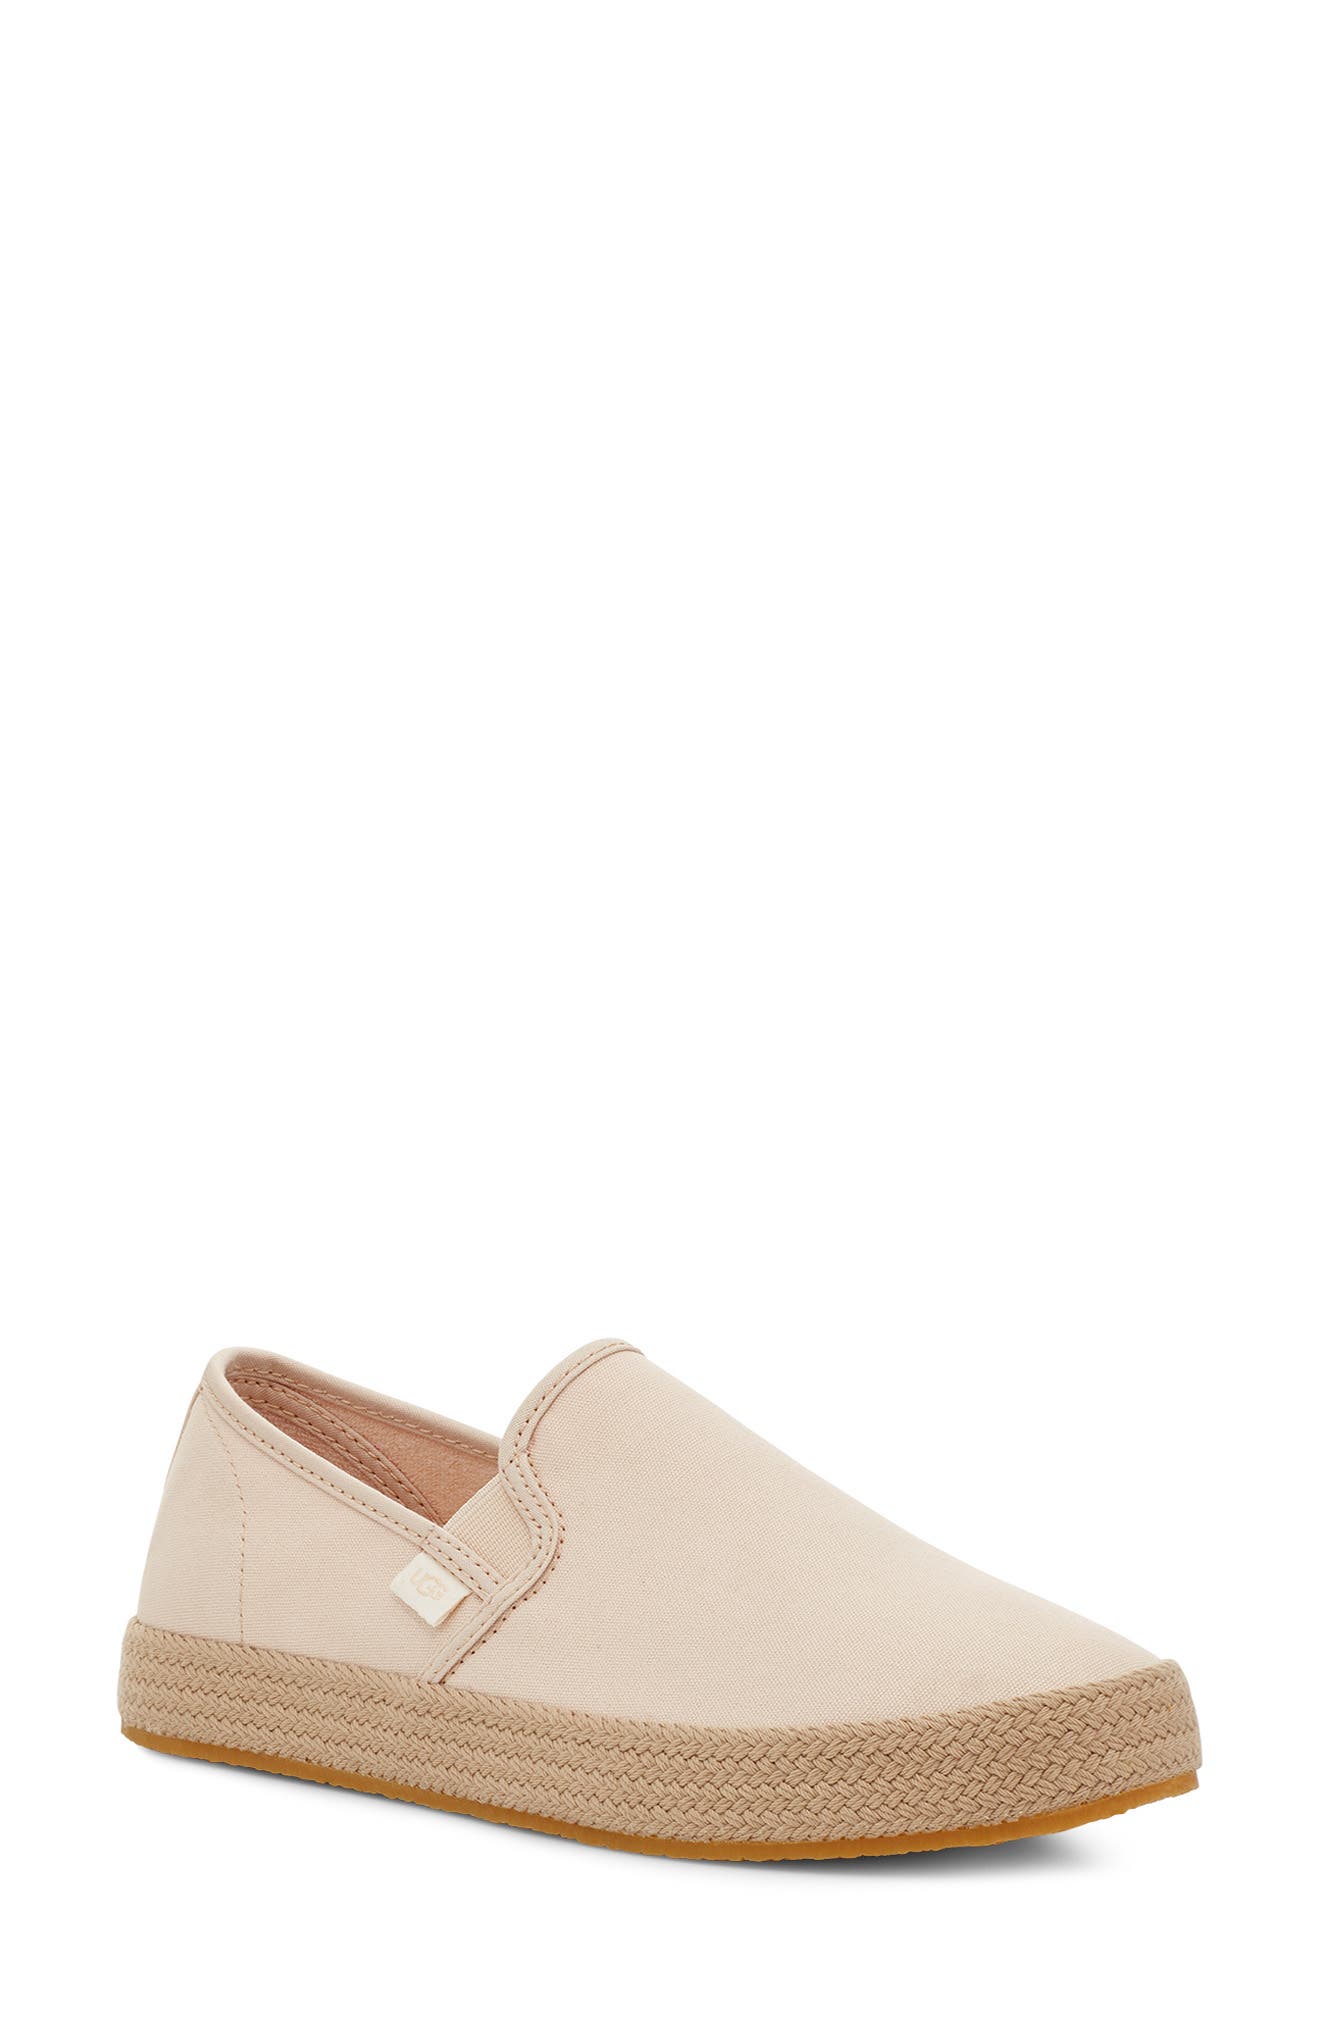 ugg driving shoes womens